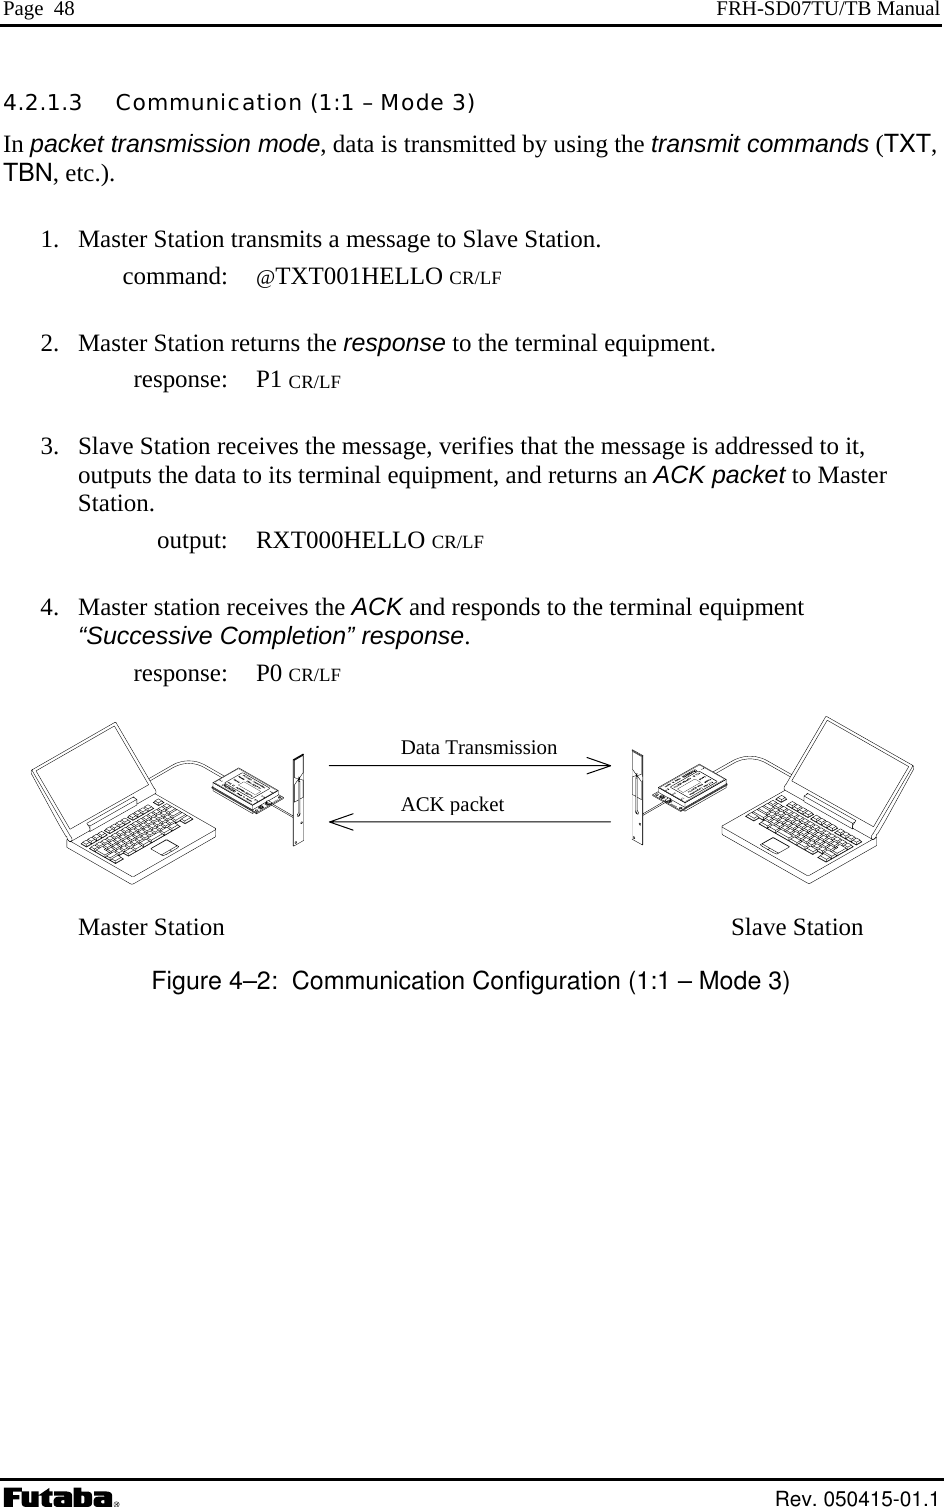 Page  48  FRH-SD07TU/TB Manual 4.2.1.3   Communication (1:1 – Mode 3) In packet transmission mode, data is transmitted by using the transmit commands (TXT, TBN, etc.).   1.  Master Station transmits a message to Slave Station.  command: @TXT001HELLO CR/LF   2.  Master Station returns the response to the terminal equipment.  response: P1 CR/LF   3.  Slave Station receives the message, verifies that the message is addressed to it, outputs the data to its terminal equipment, and returns an ACK packet to Master Station.  output: RXT000HELLO CR/LF   4.  Master station receives the ACK and responds to the terminal equipment “Successive Completion” response.  response: P0 CR/LF                                                         Master Station                                                                                 Slave Station Data TransmissionACK packetFigure 4–2:  Communication Configuration (1:1 – Mode 3)  Rev. 050415-01.1 